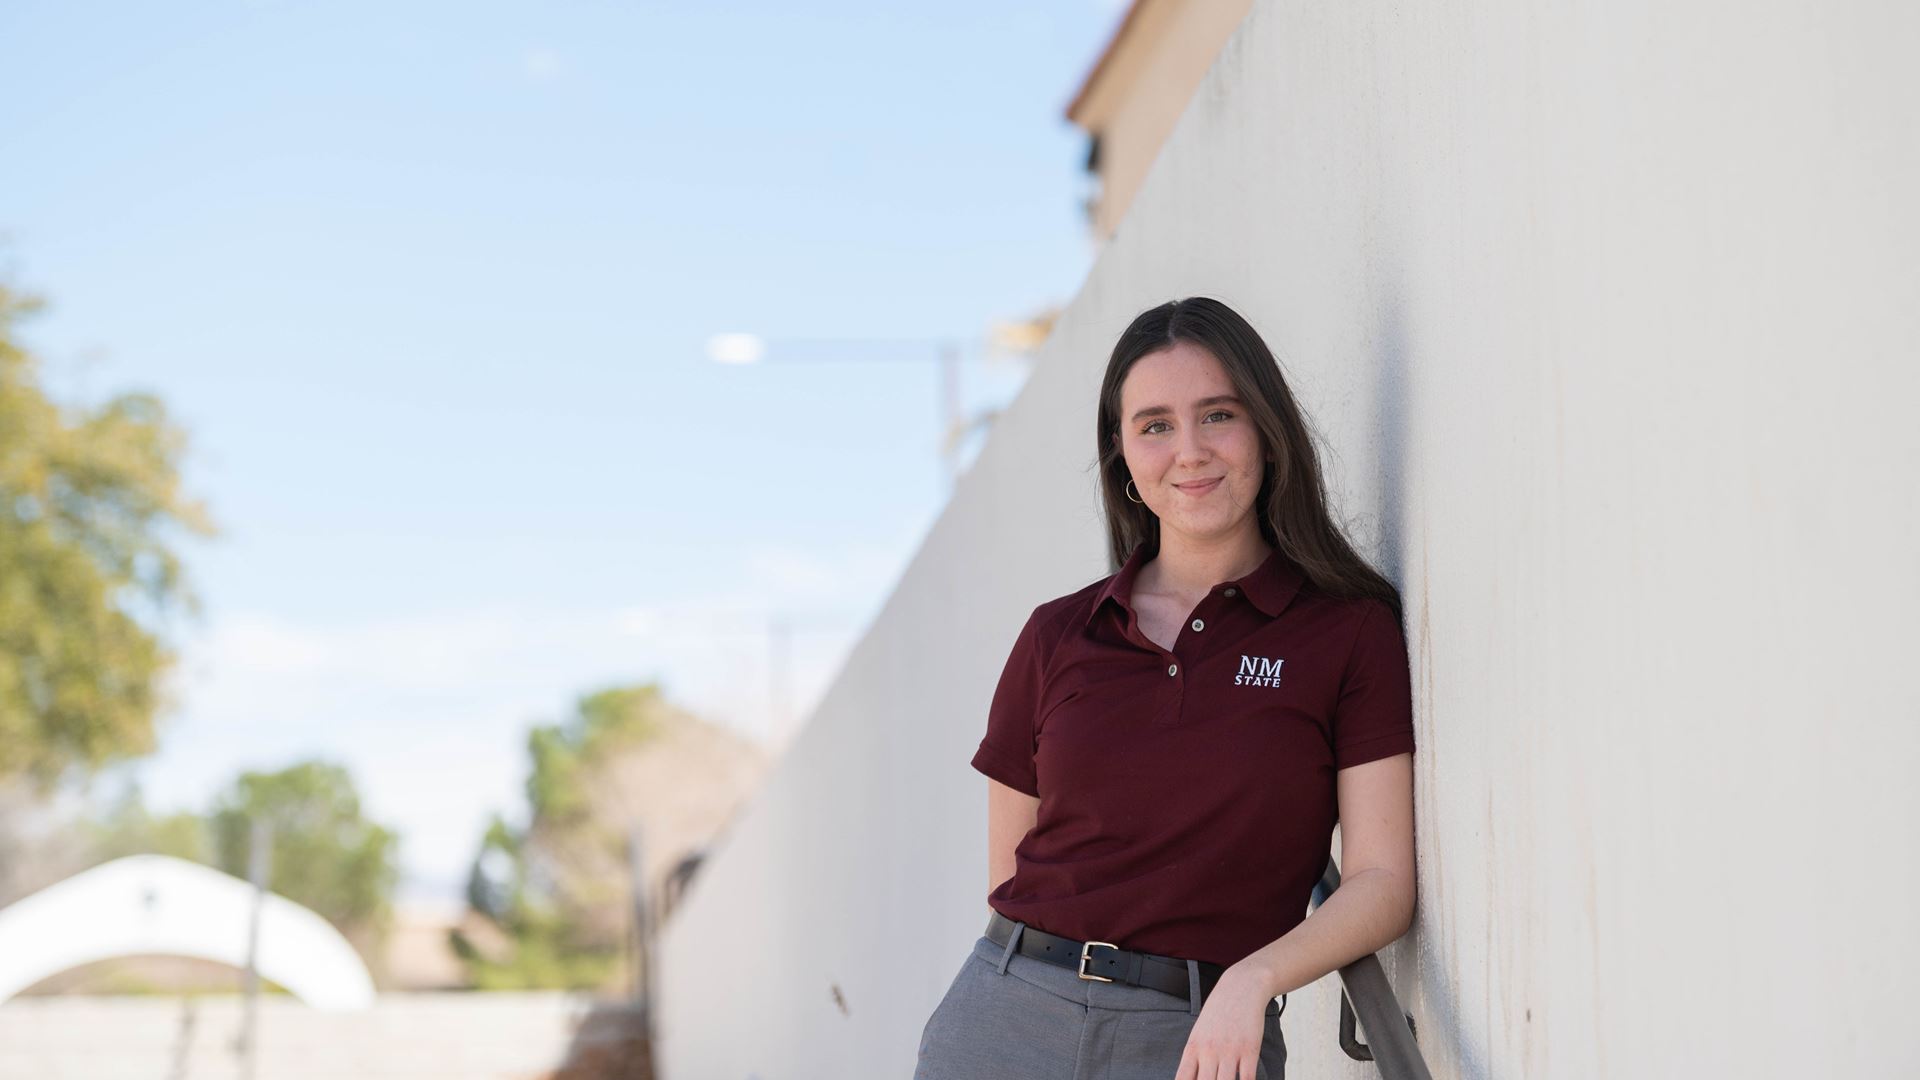 NMSU students gain work experience through cooperative education